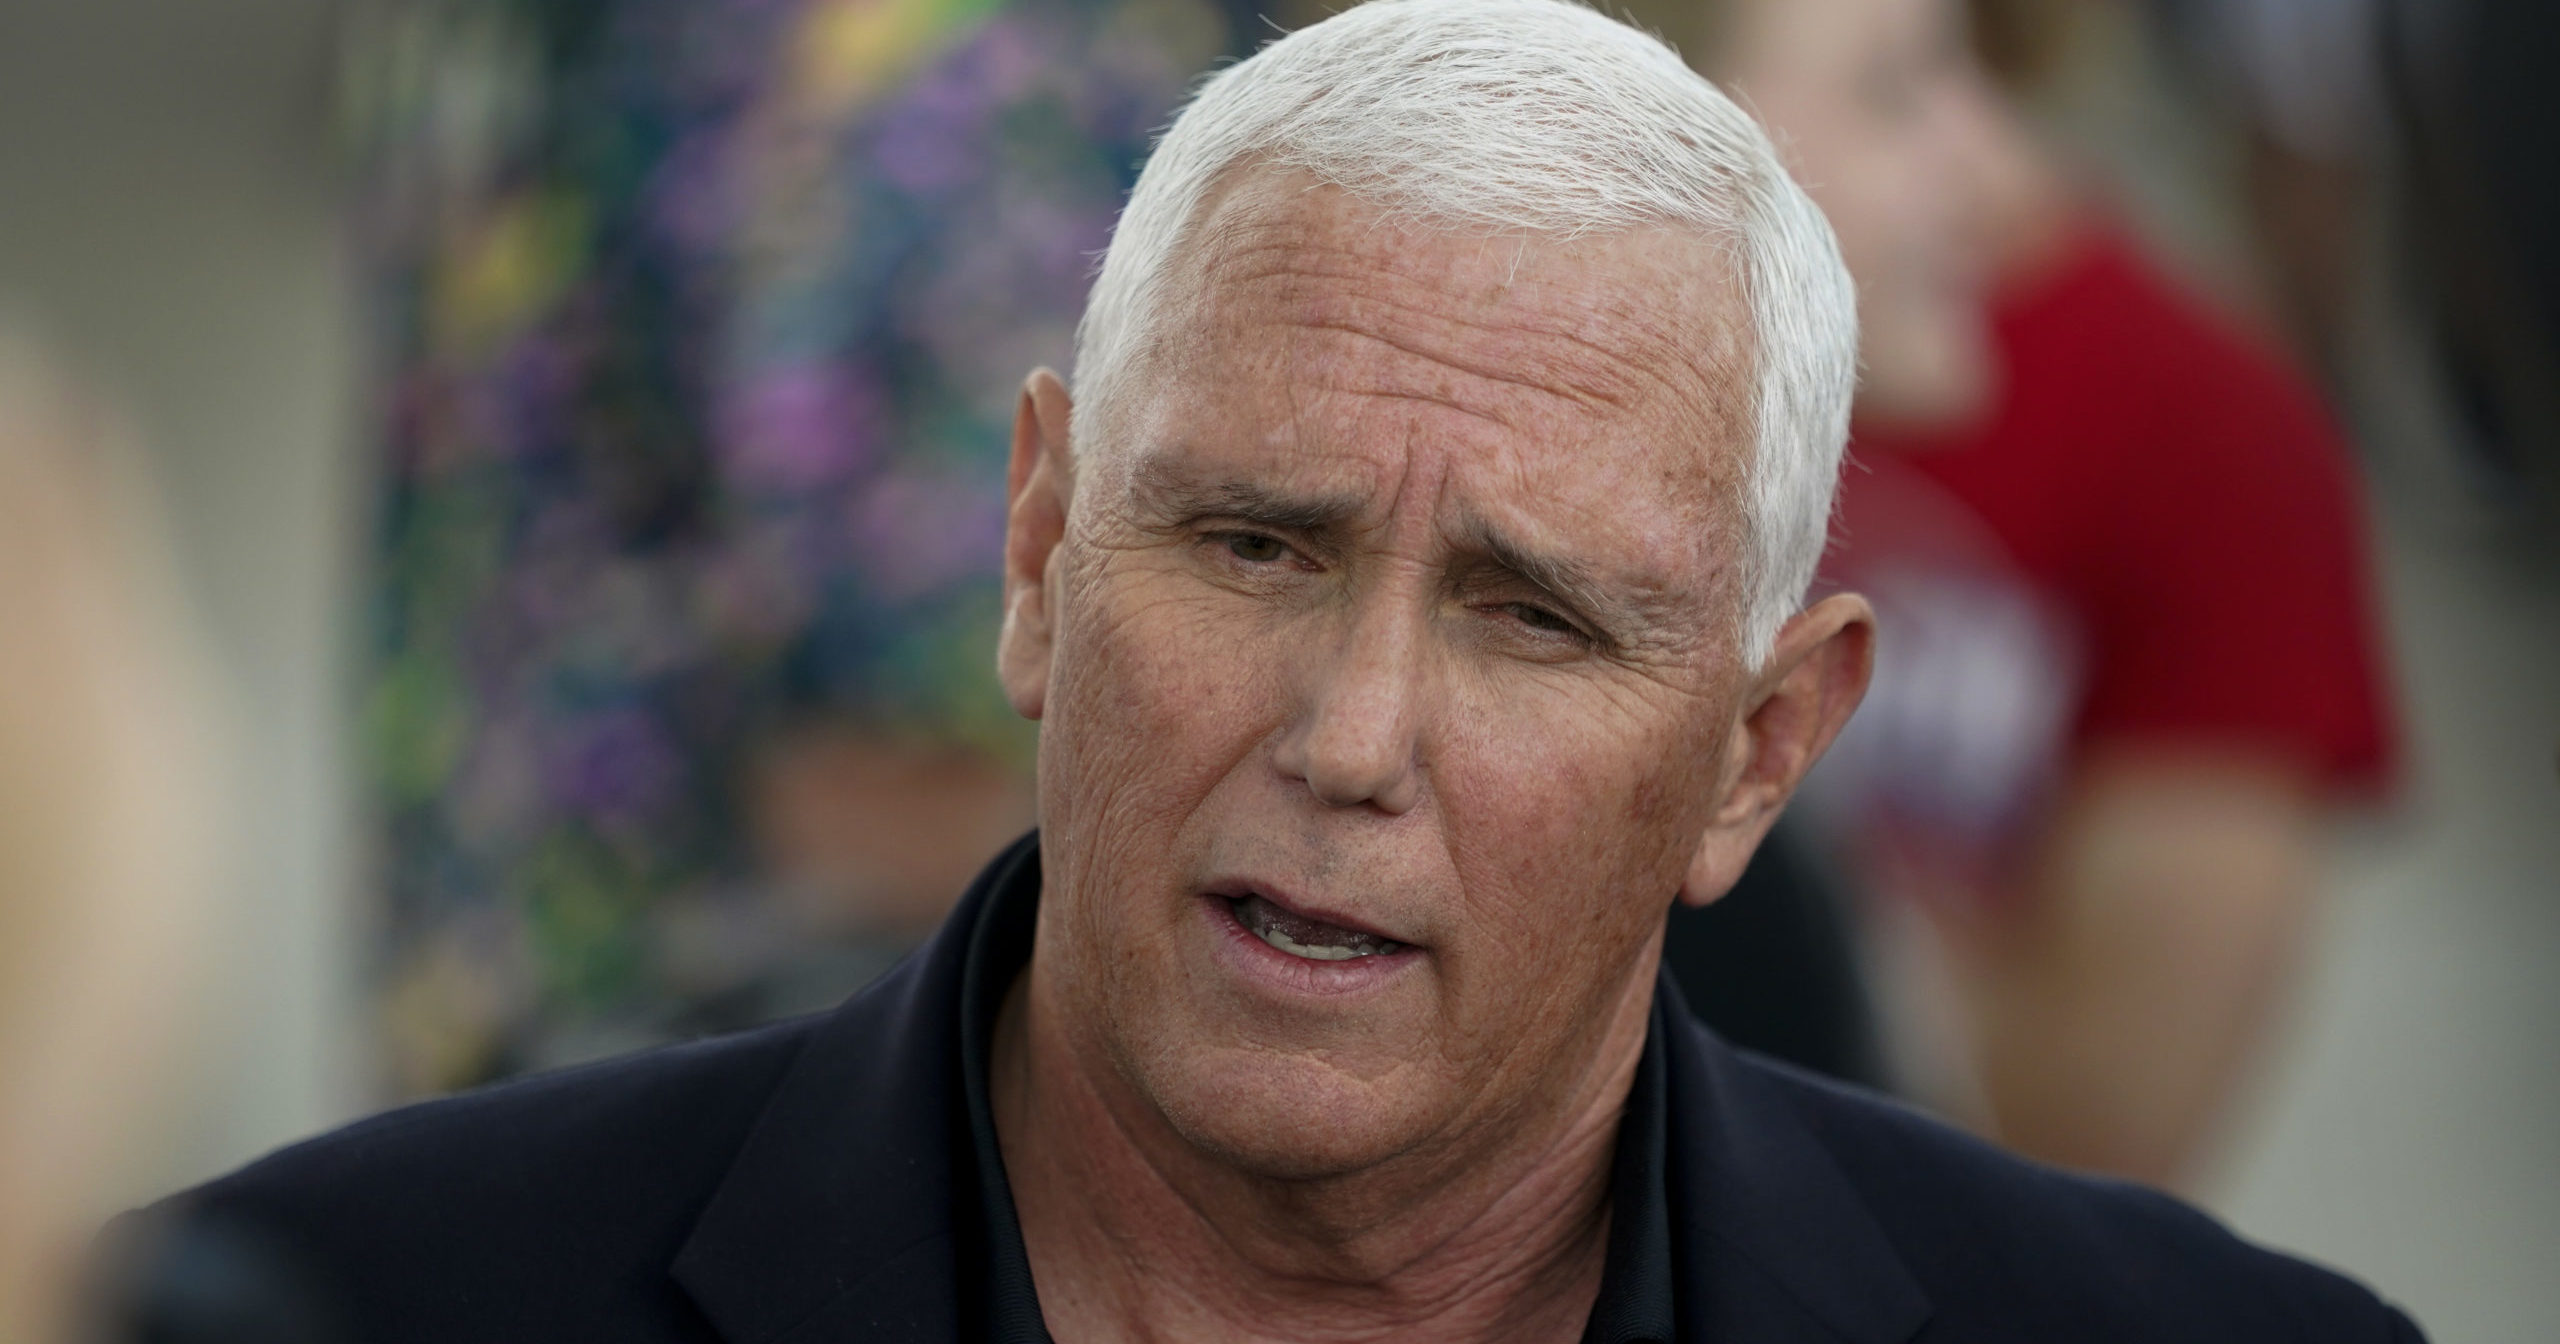 Former Vice President Mike Pence speaks to reporters during a visit to the Iowa State Fair on Friday in Des Moines, Iowa.